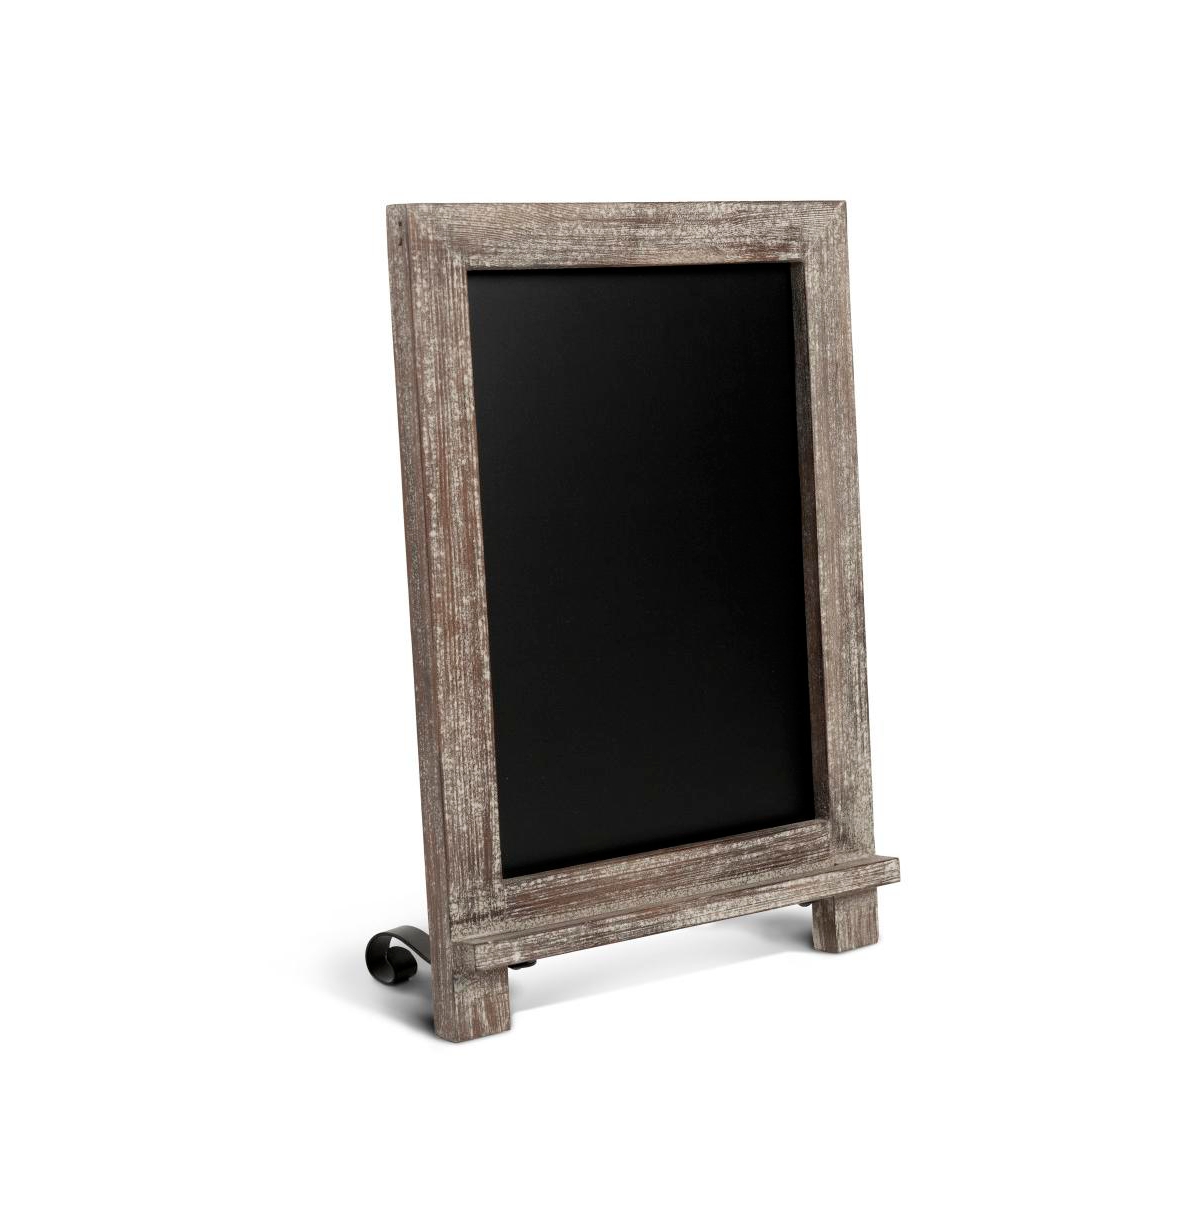 Hanging Or Tabletop Chalkboard With Legs/Wedding Table Sign/Kitchen Countertop Memo Board - Weathered brown